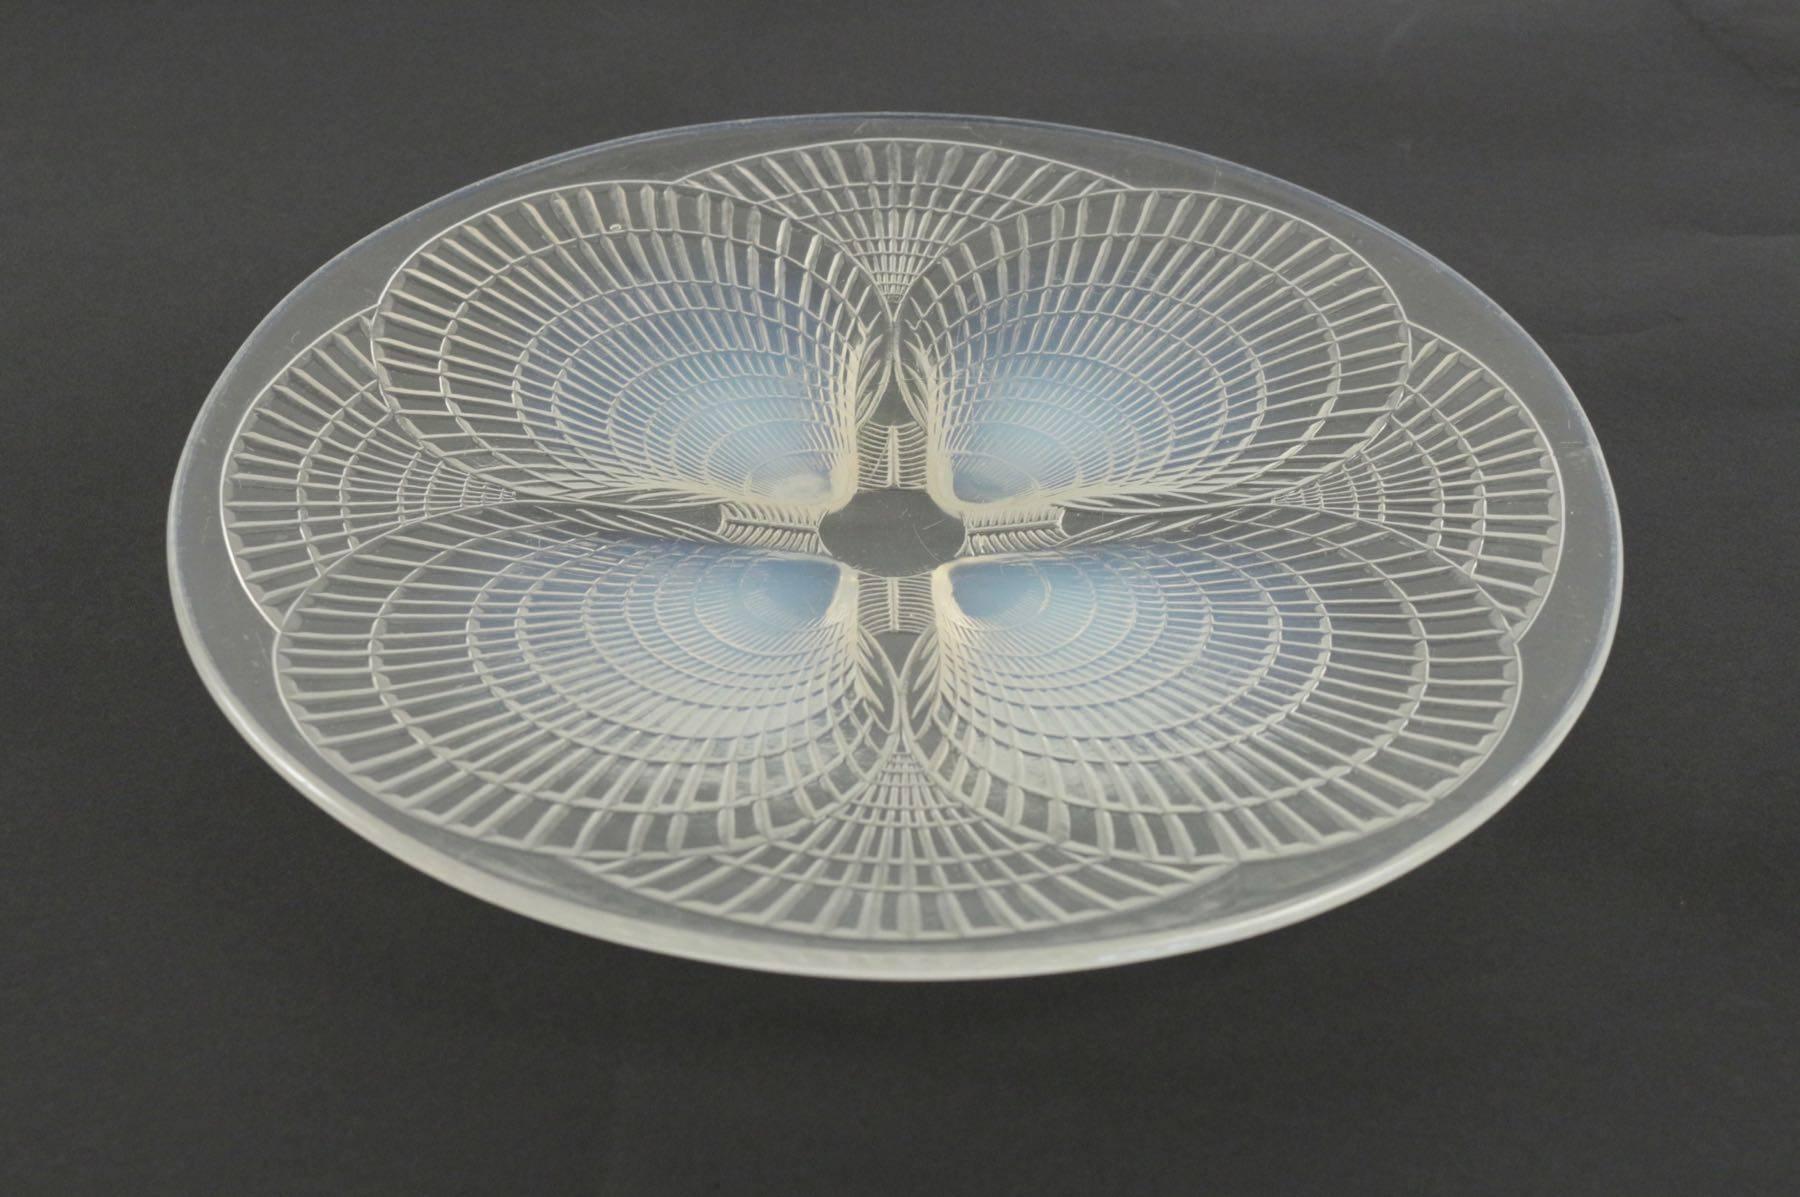 René Lalique (1860-1945) opalescent molded pressed glass Coquilles pattern plate with moulded shell decoration, engraved signature moulded.
'R. Lalique France', 30 cm diameter 
exist in the catalogue in 1928 and 1932 and 1937. 
Bibliography :